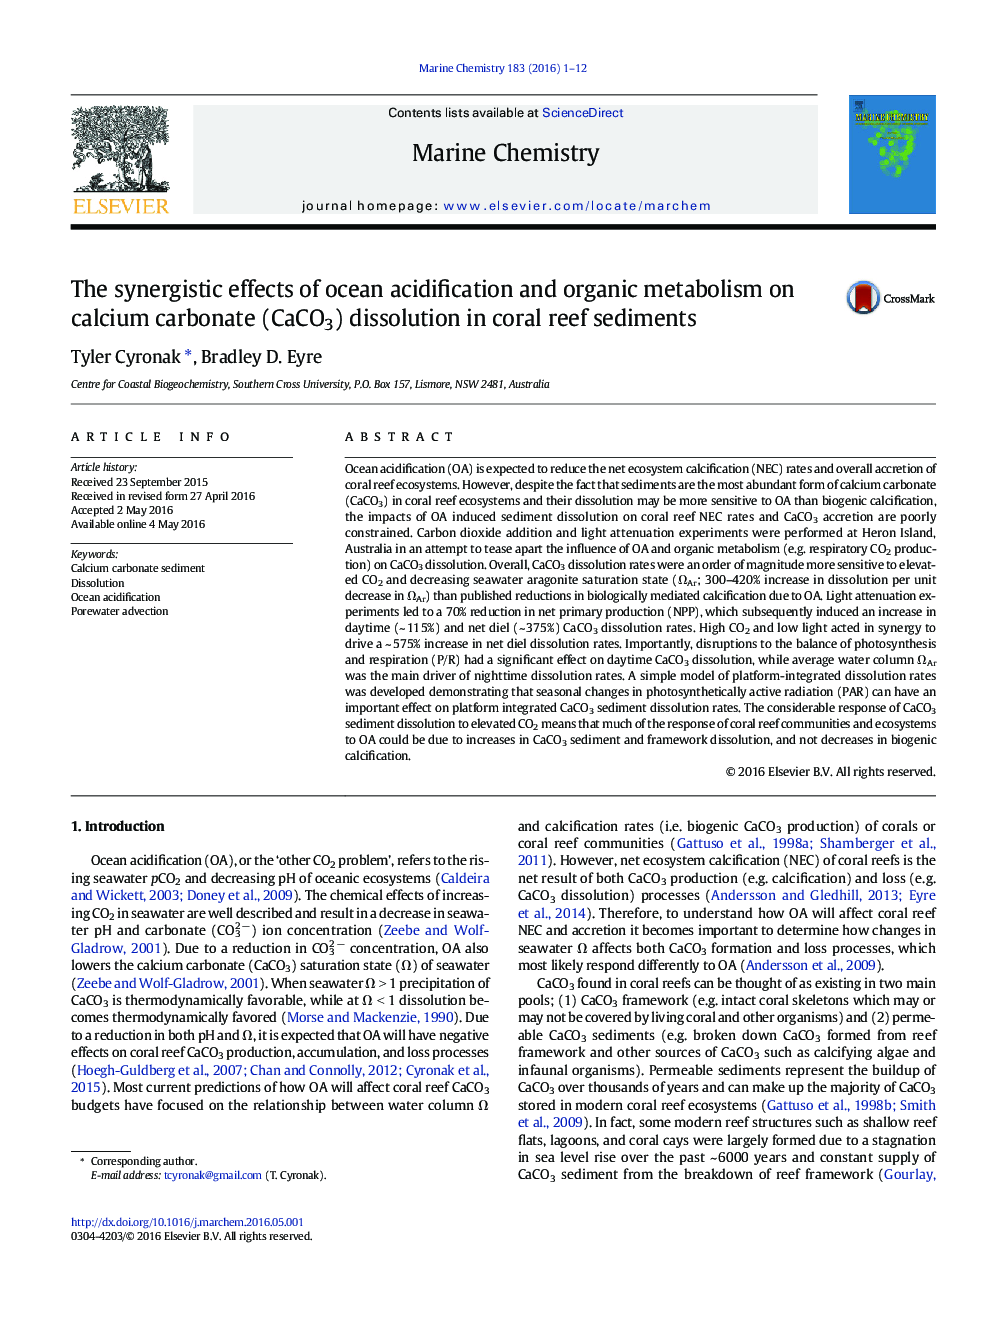 The synergistic effects of ocean acidification and organic metabolism on calcium carbonate (CaCO3) dissolution in coral reef sediments